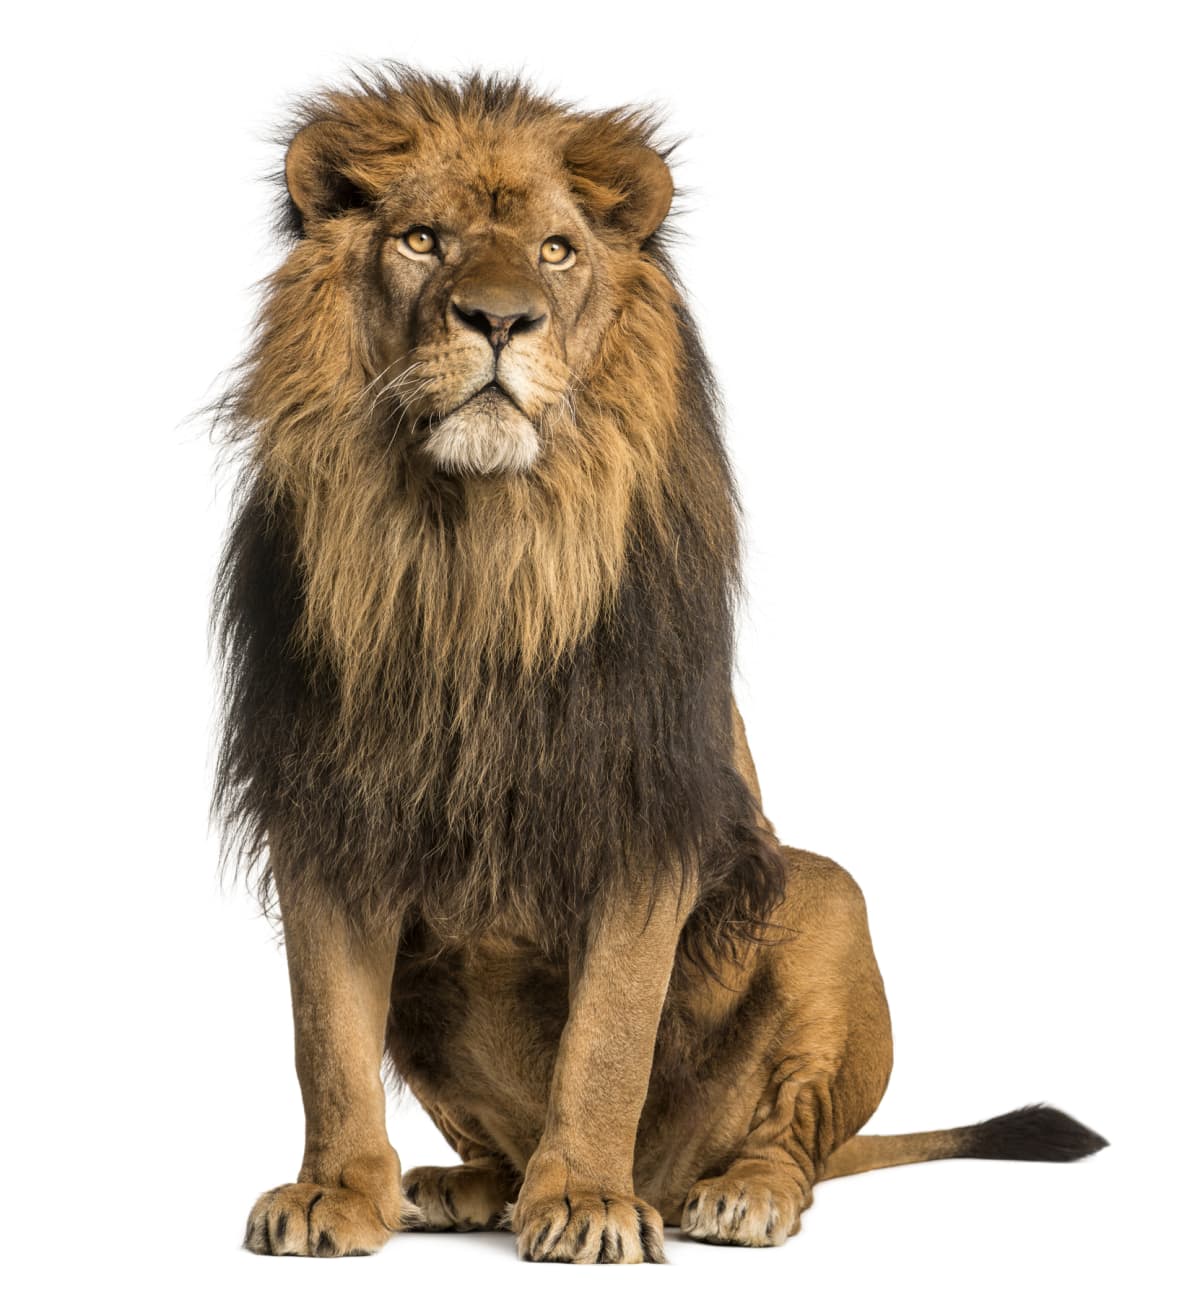 Male lion sitting against a white background